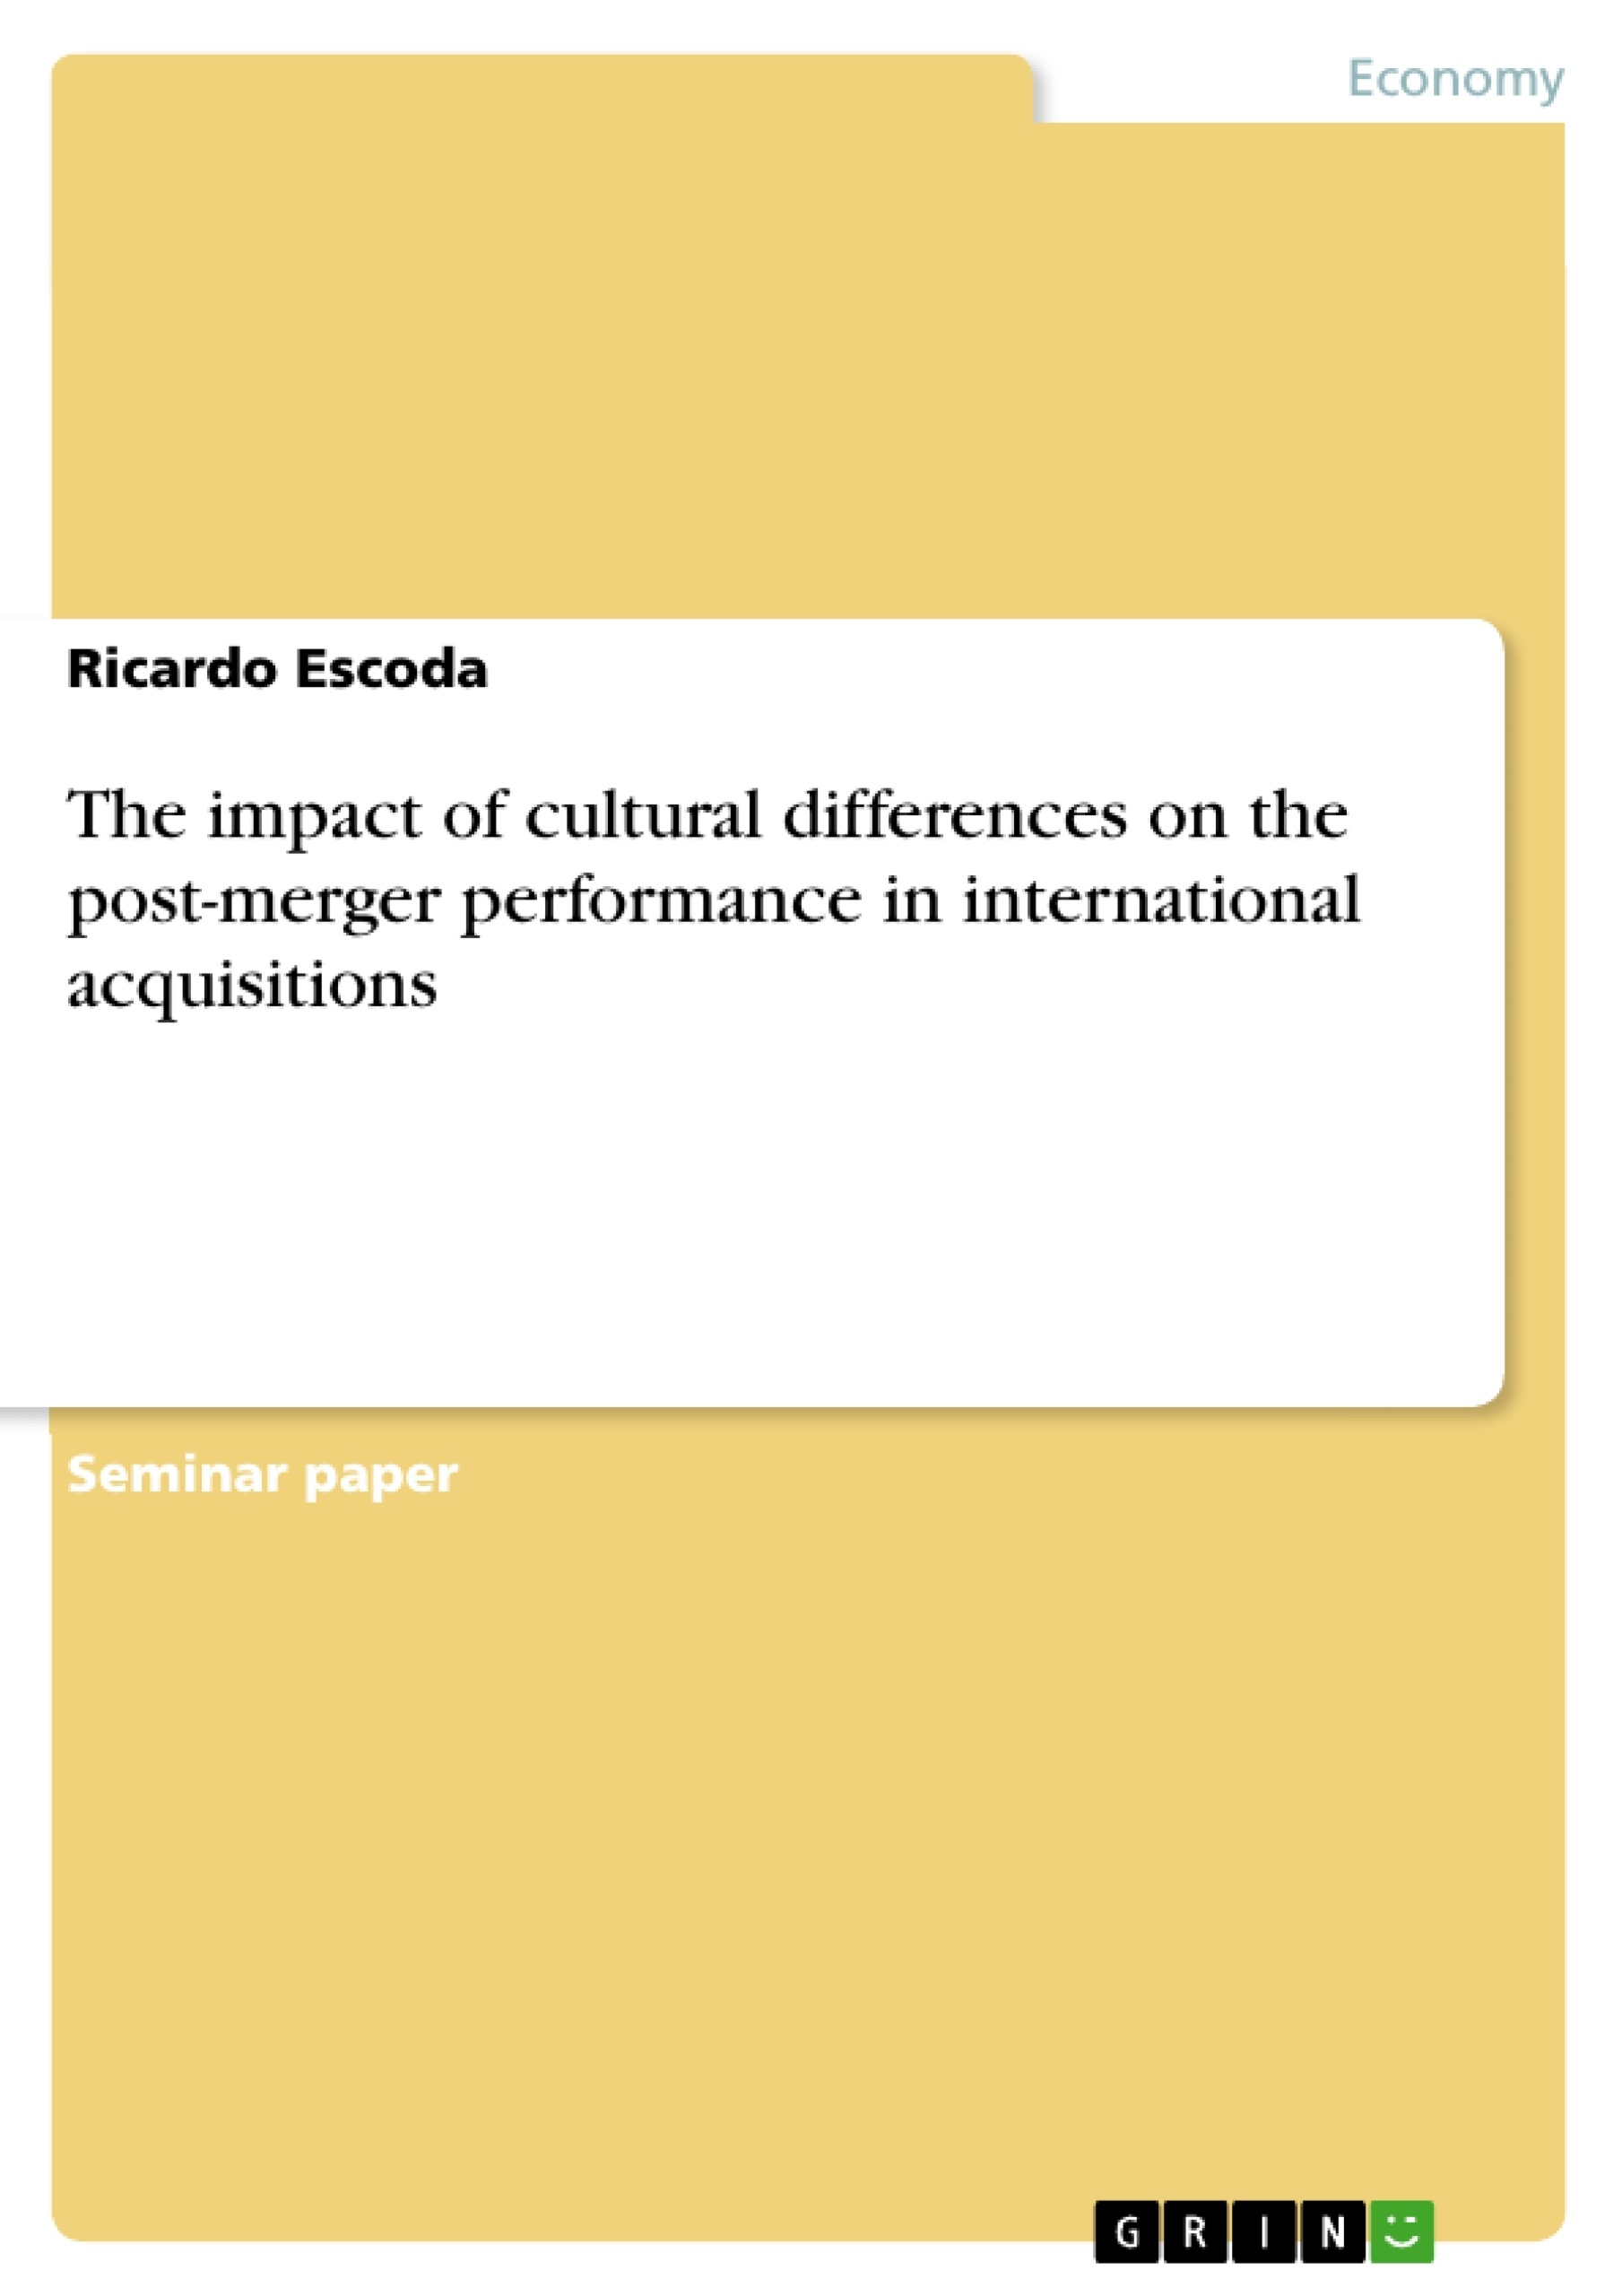 Title: The impact of cultural differences on the post-merger performance in international acquisitions